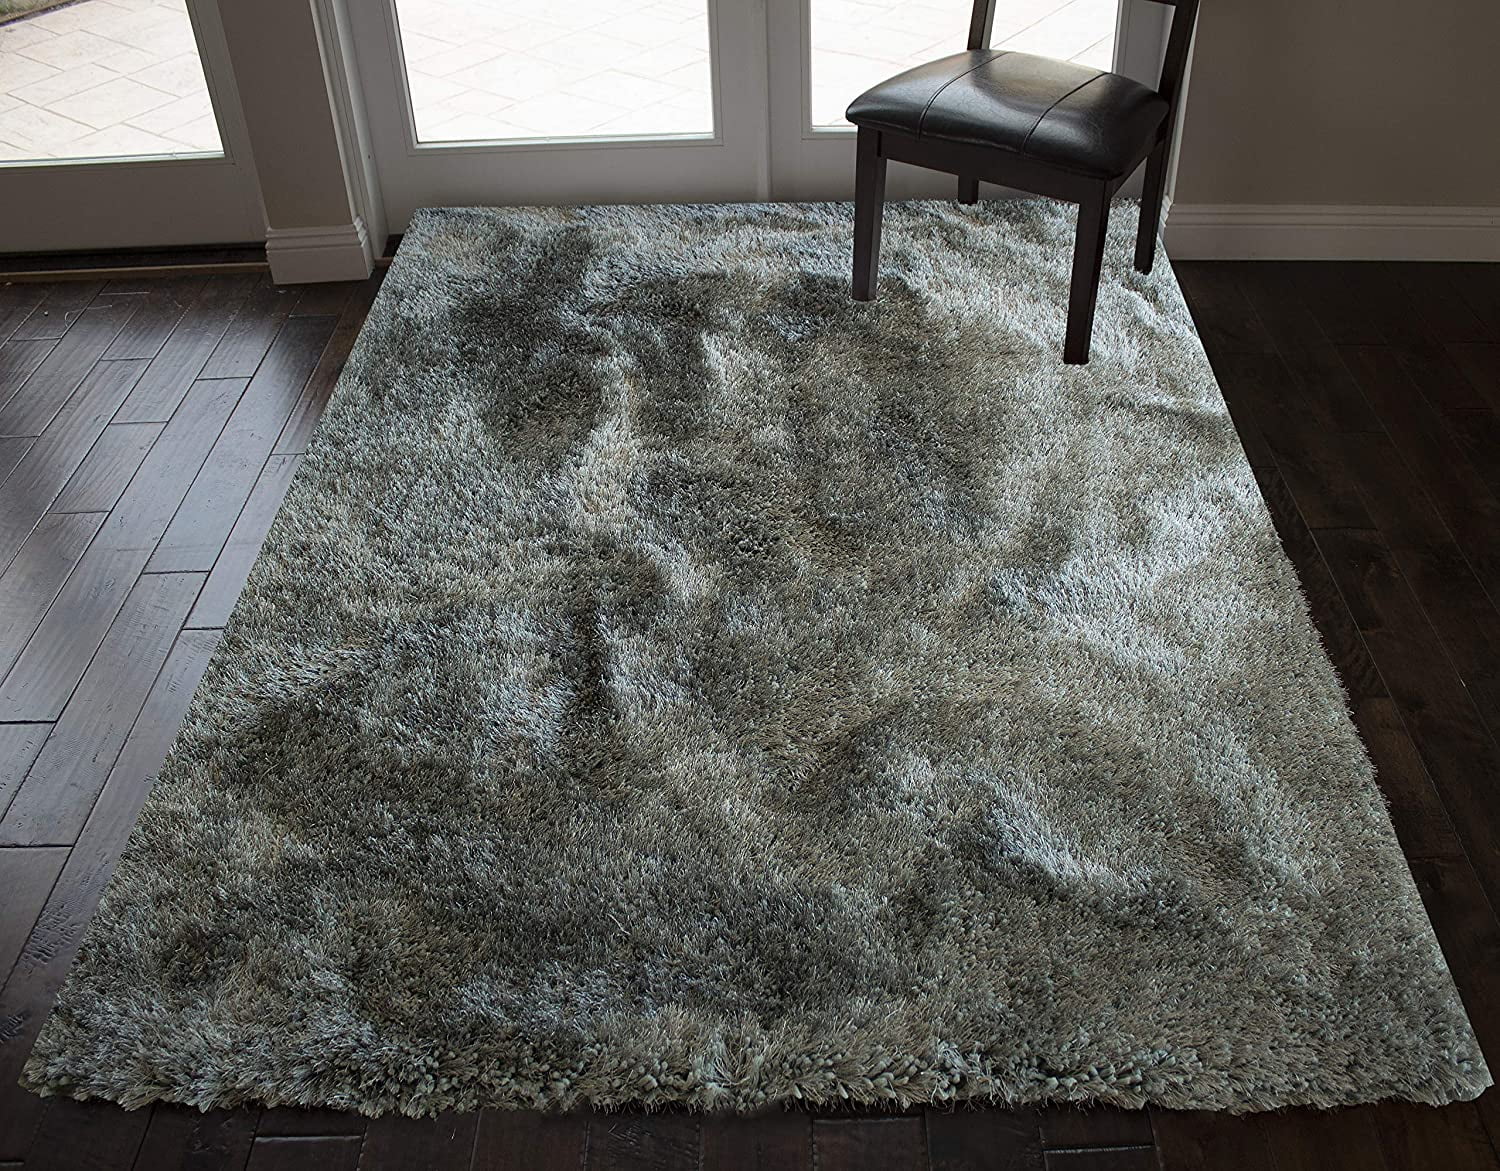 off Retail Price! CLEARANCE STOCK-up to 70% Green Shaggy Soft Hand-Woven Rug 